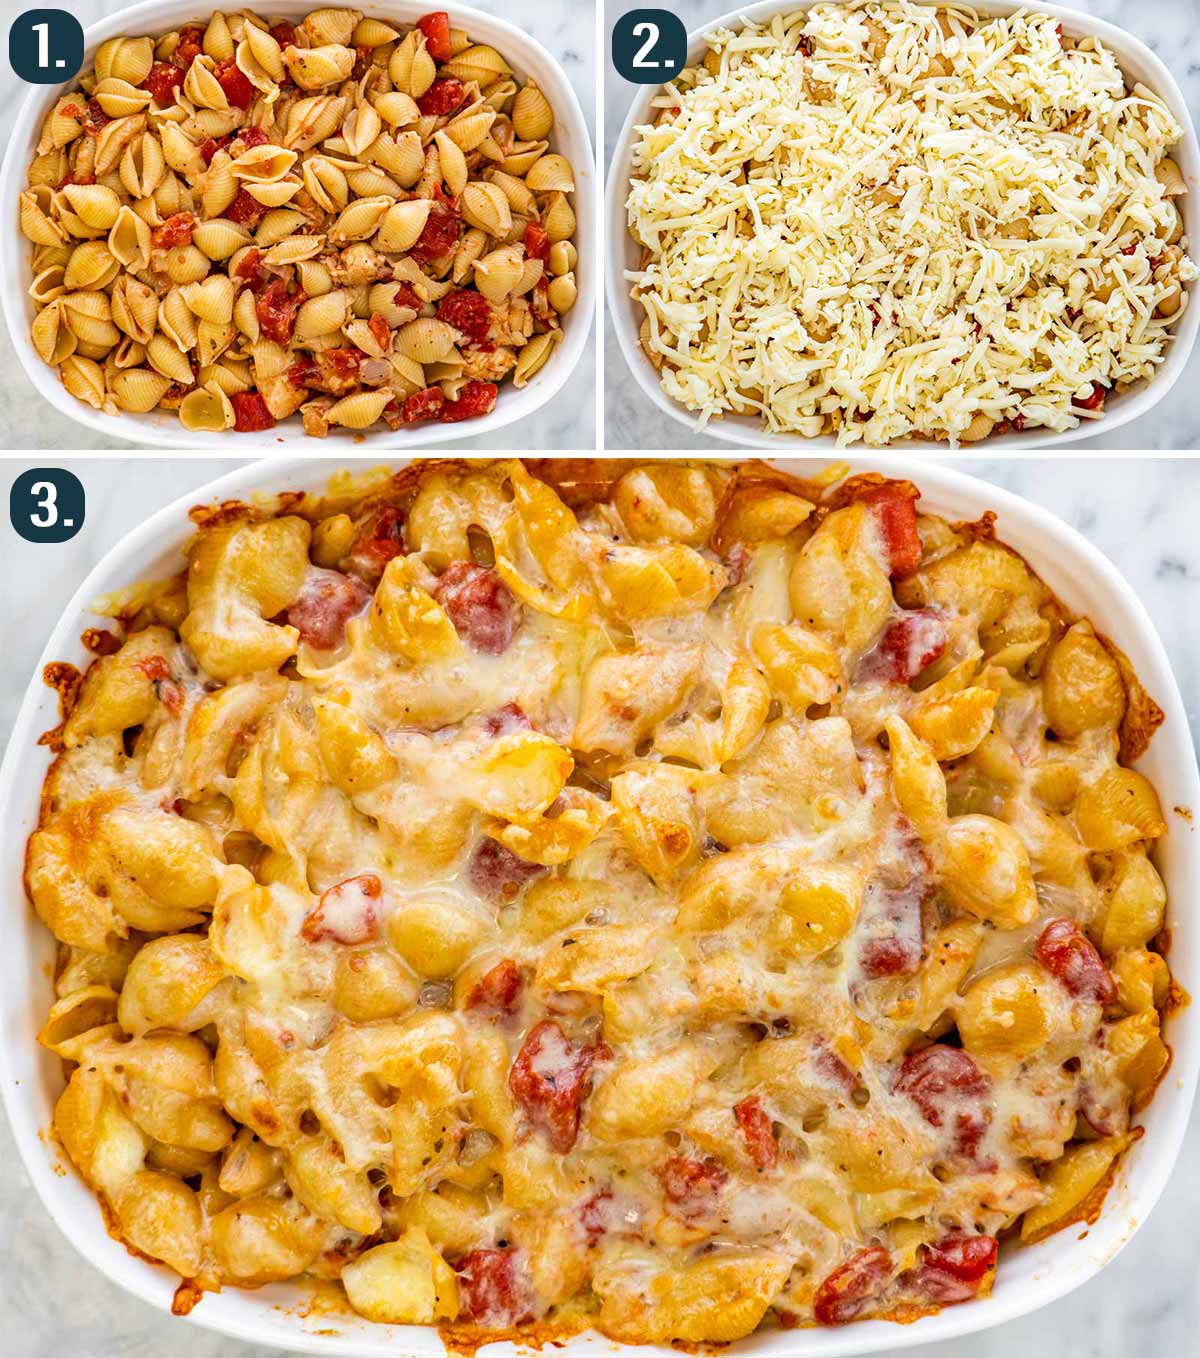 chicken casserole before and after baking.